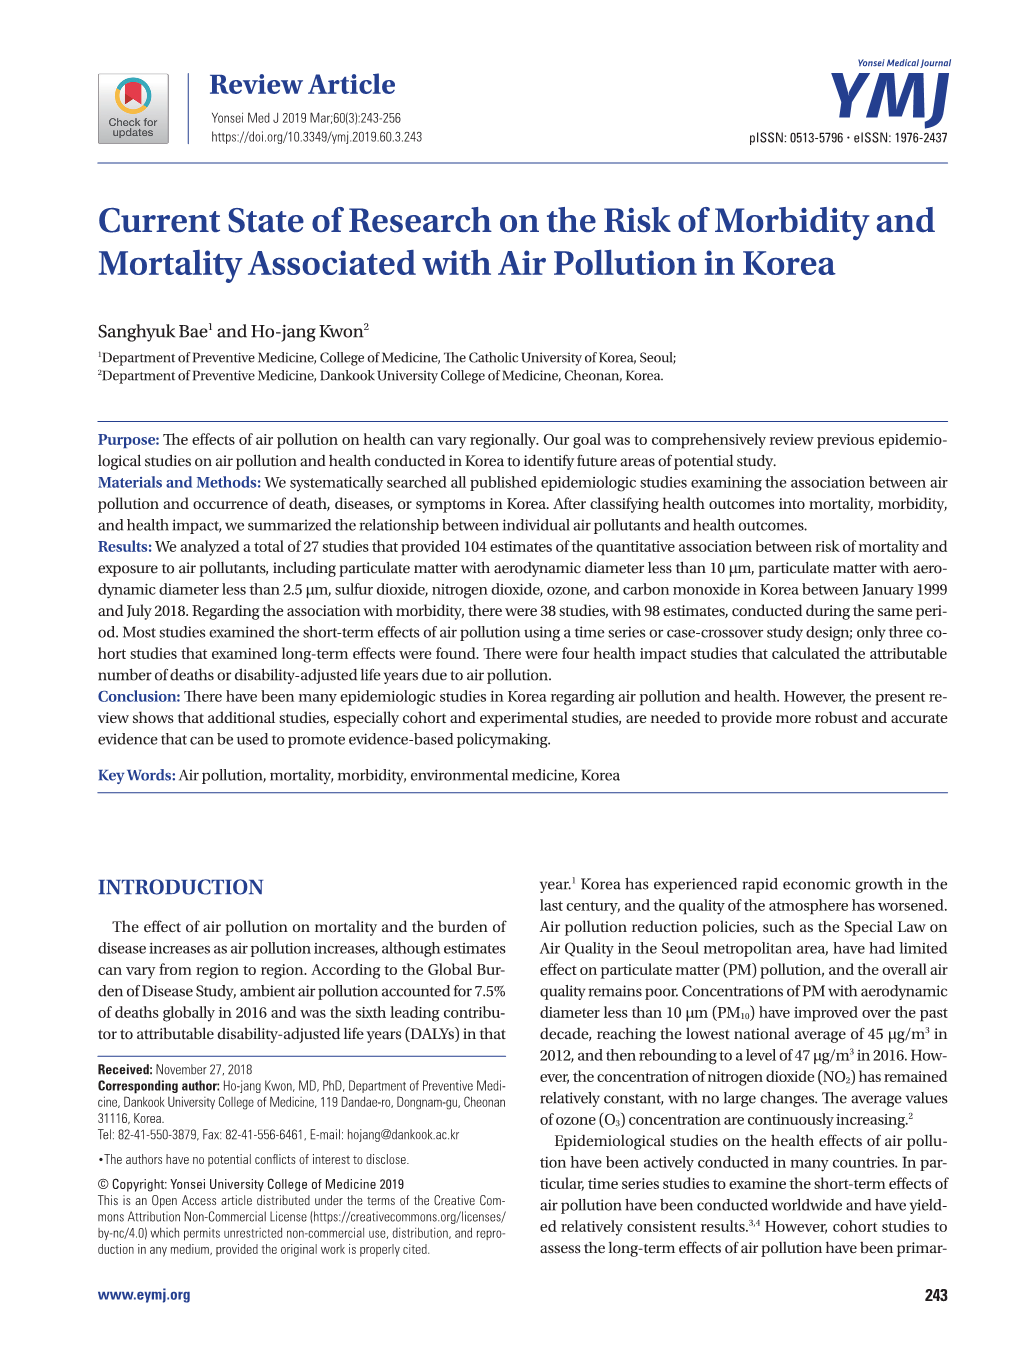 Current State of Research on the Risk of Morbidity and Mortality Associated with Air Pollution in Korea